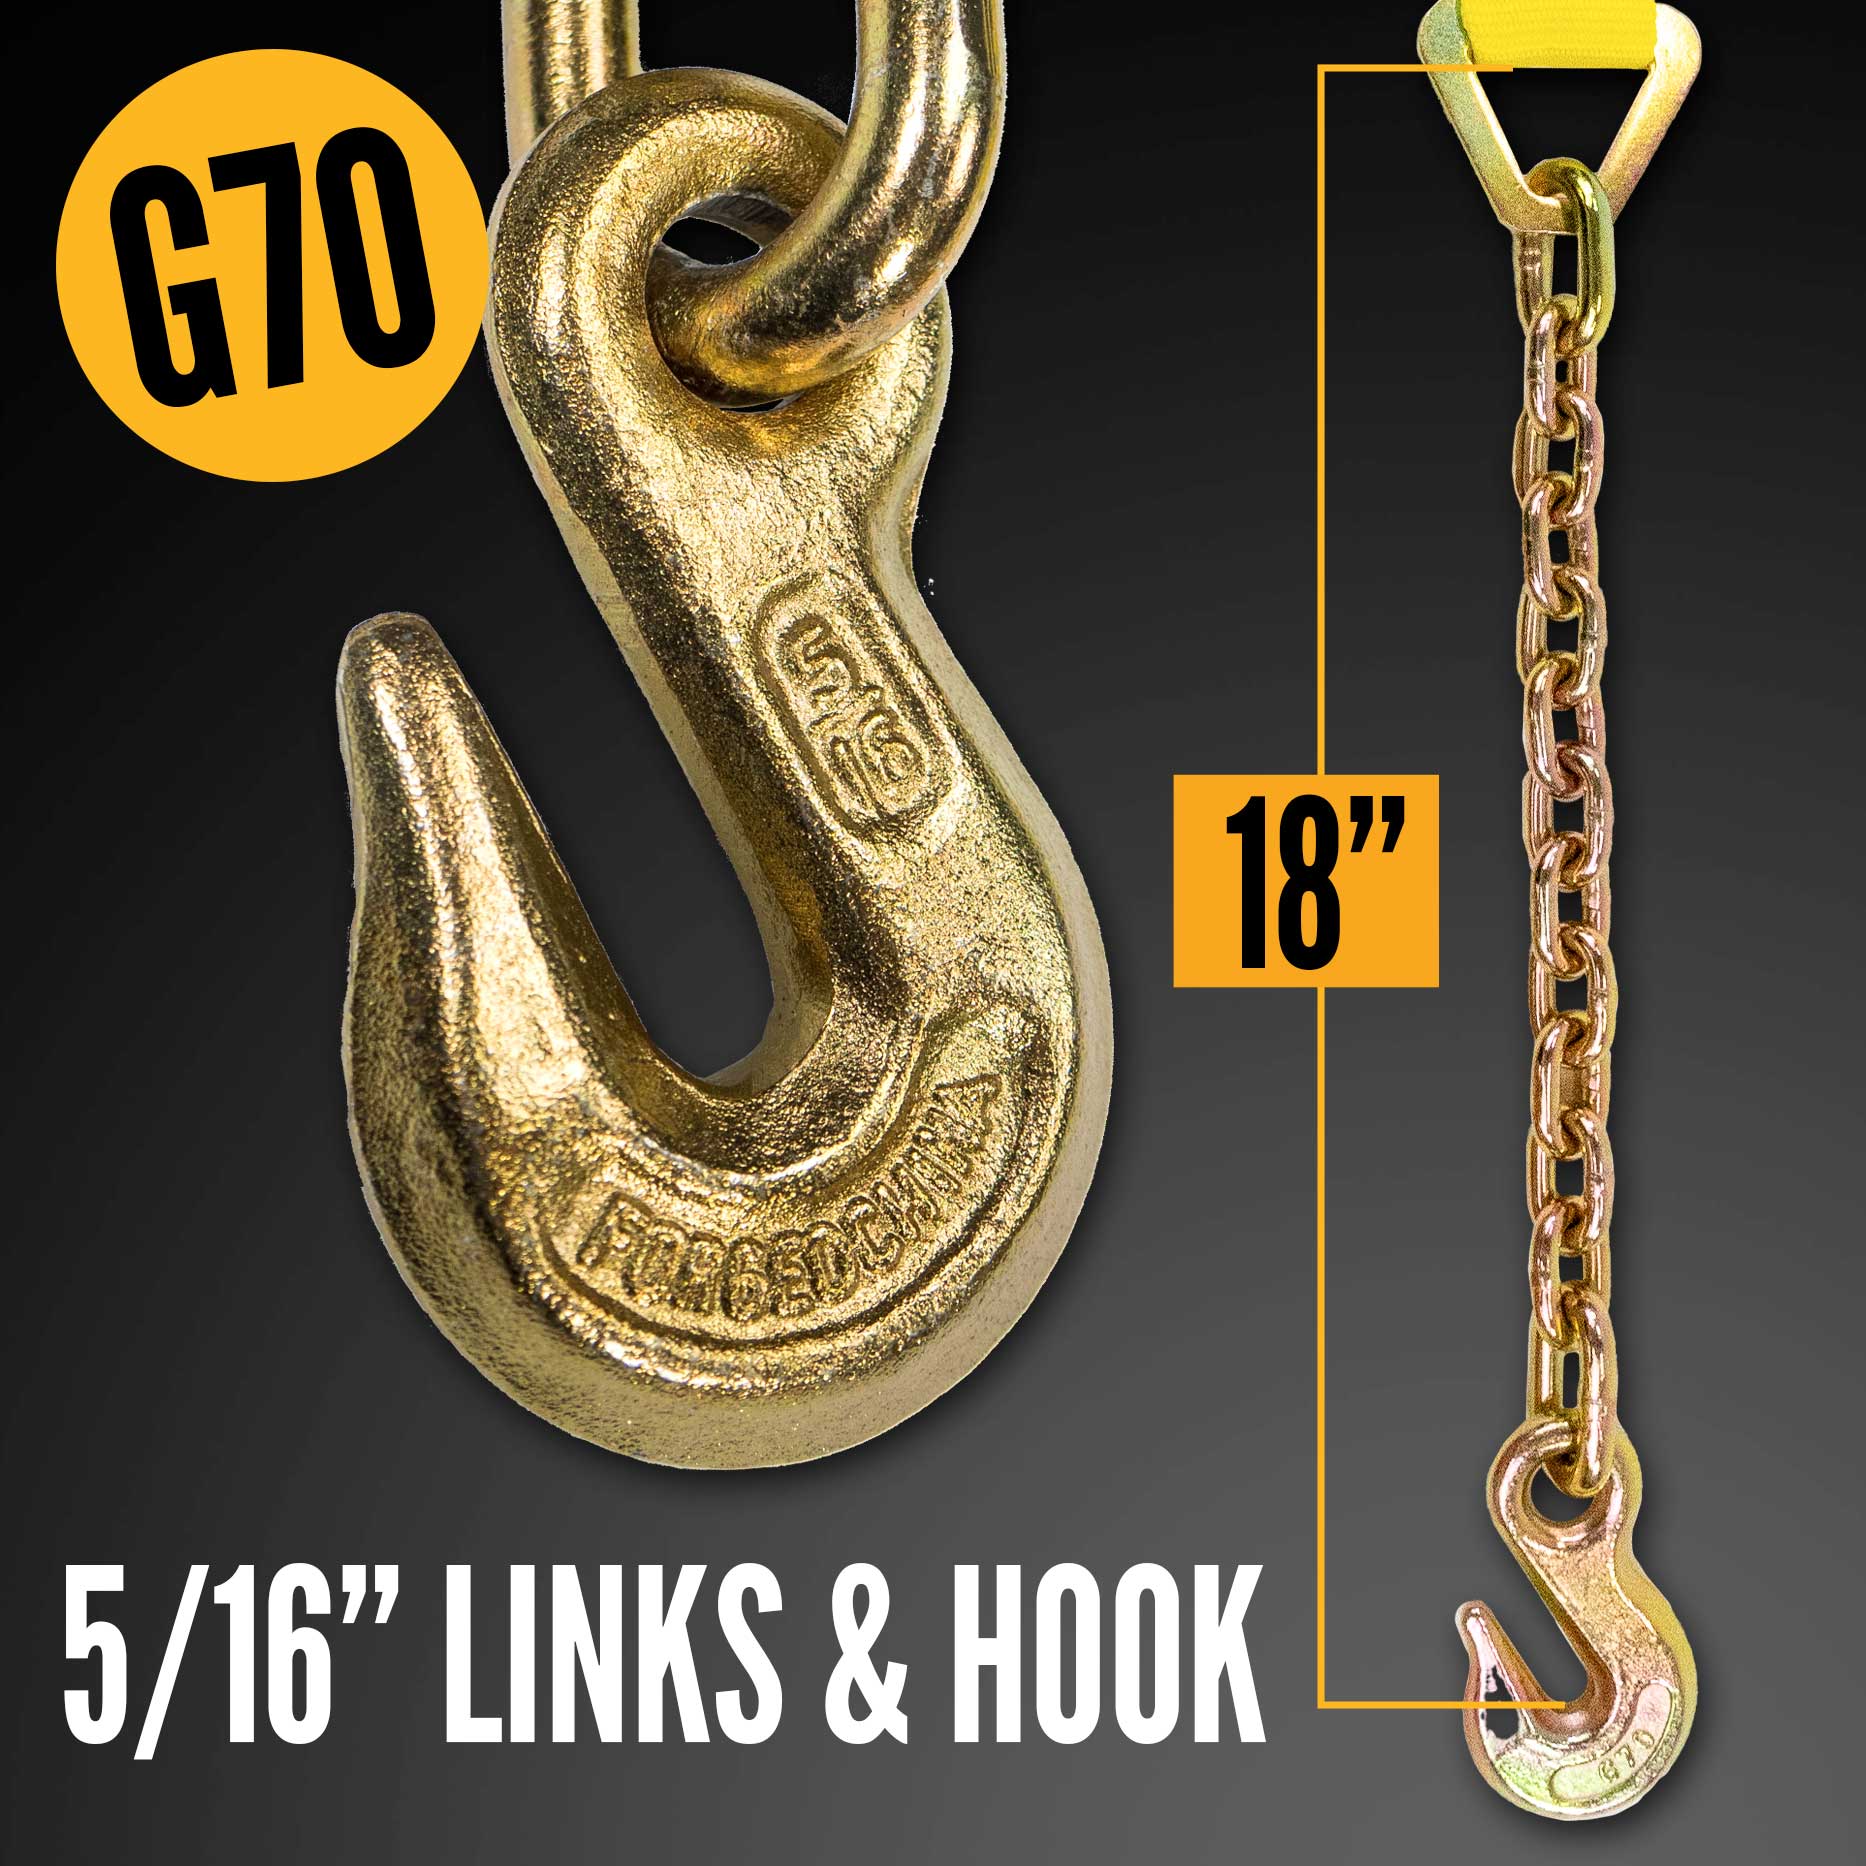 15' tow truck strap -  grade 70 18" chain ends has 5/16" grab hook